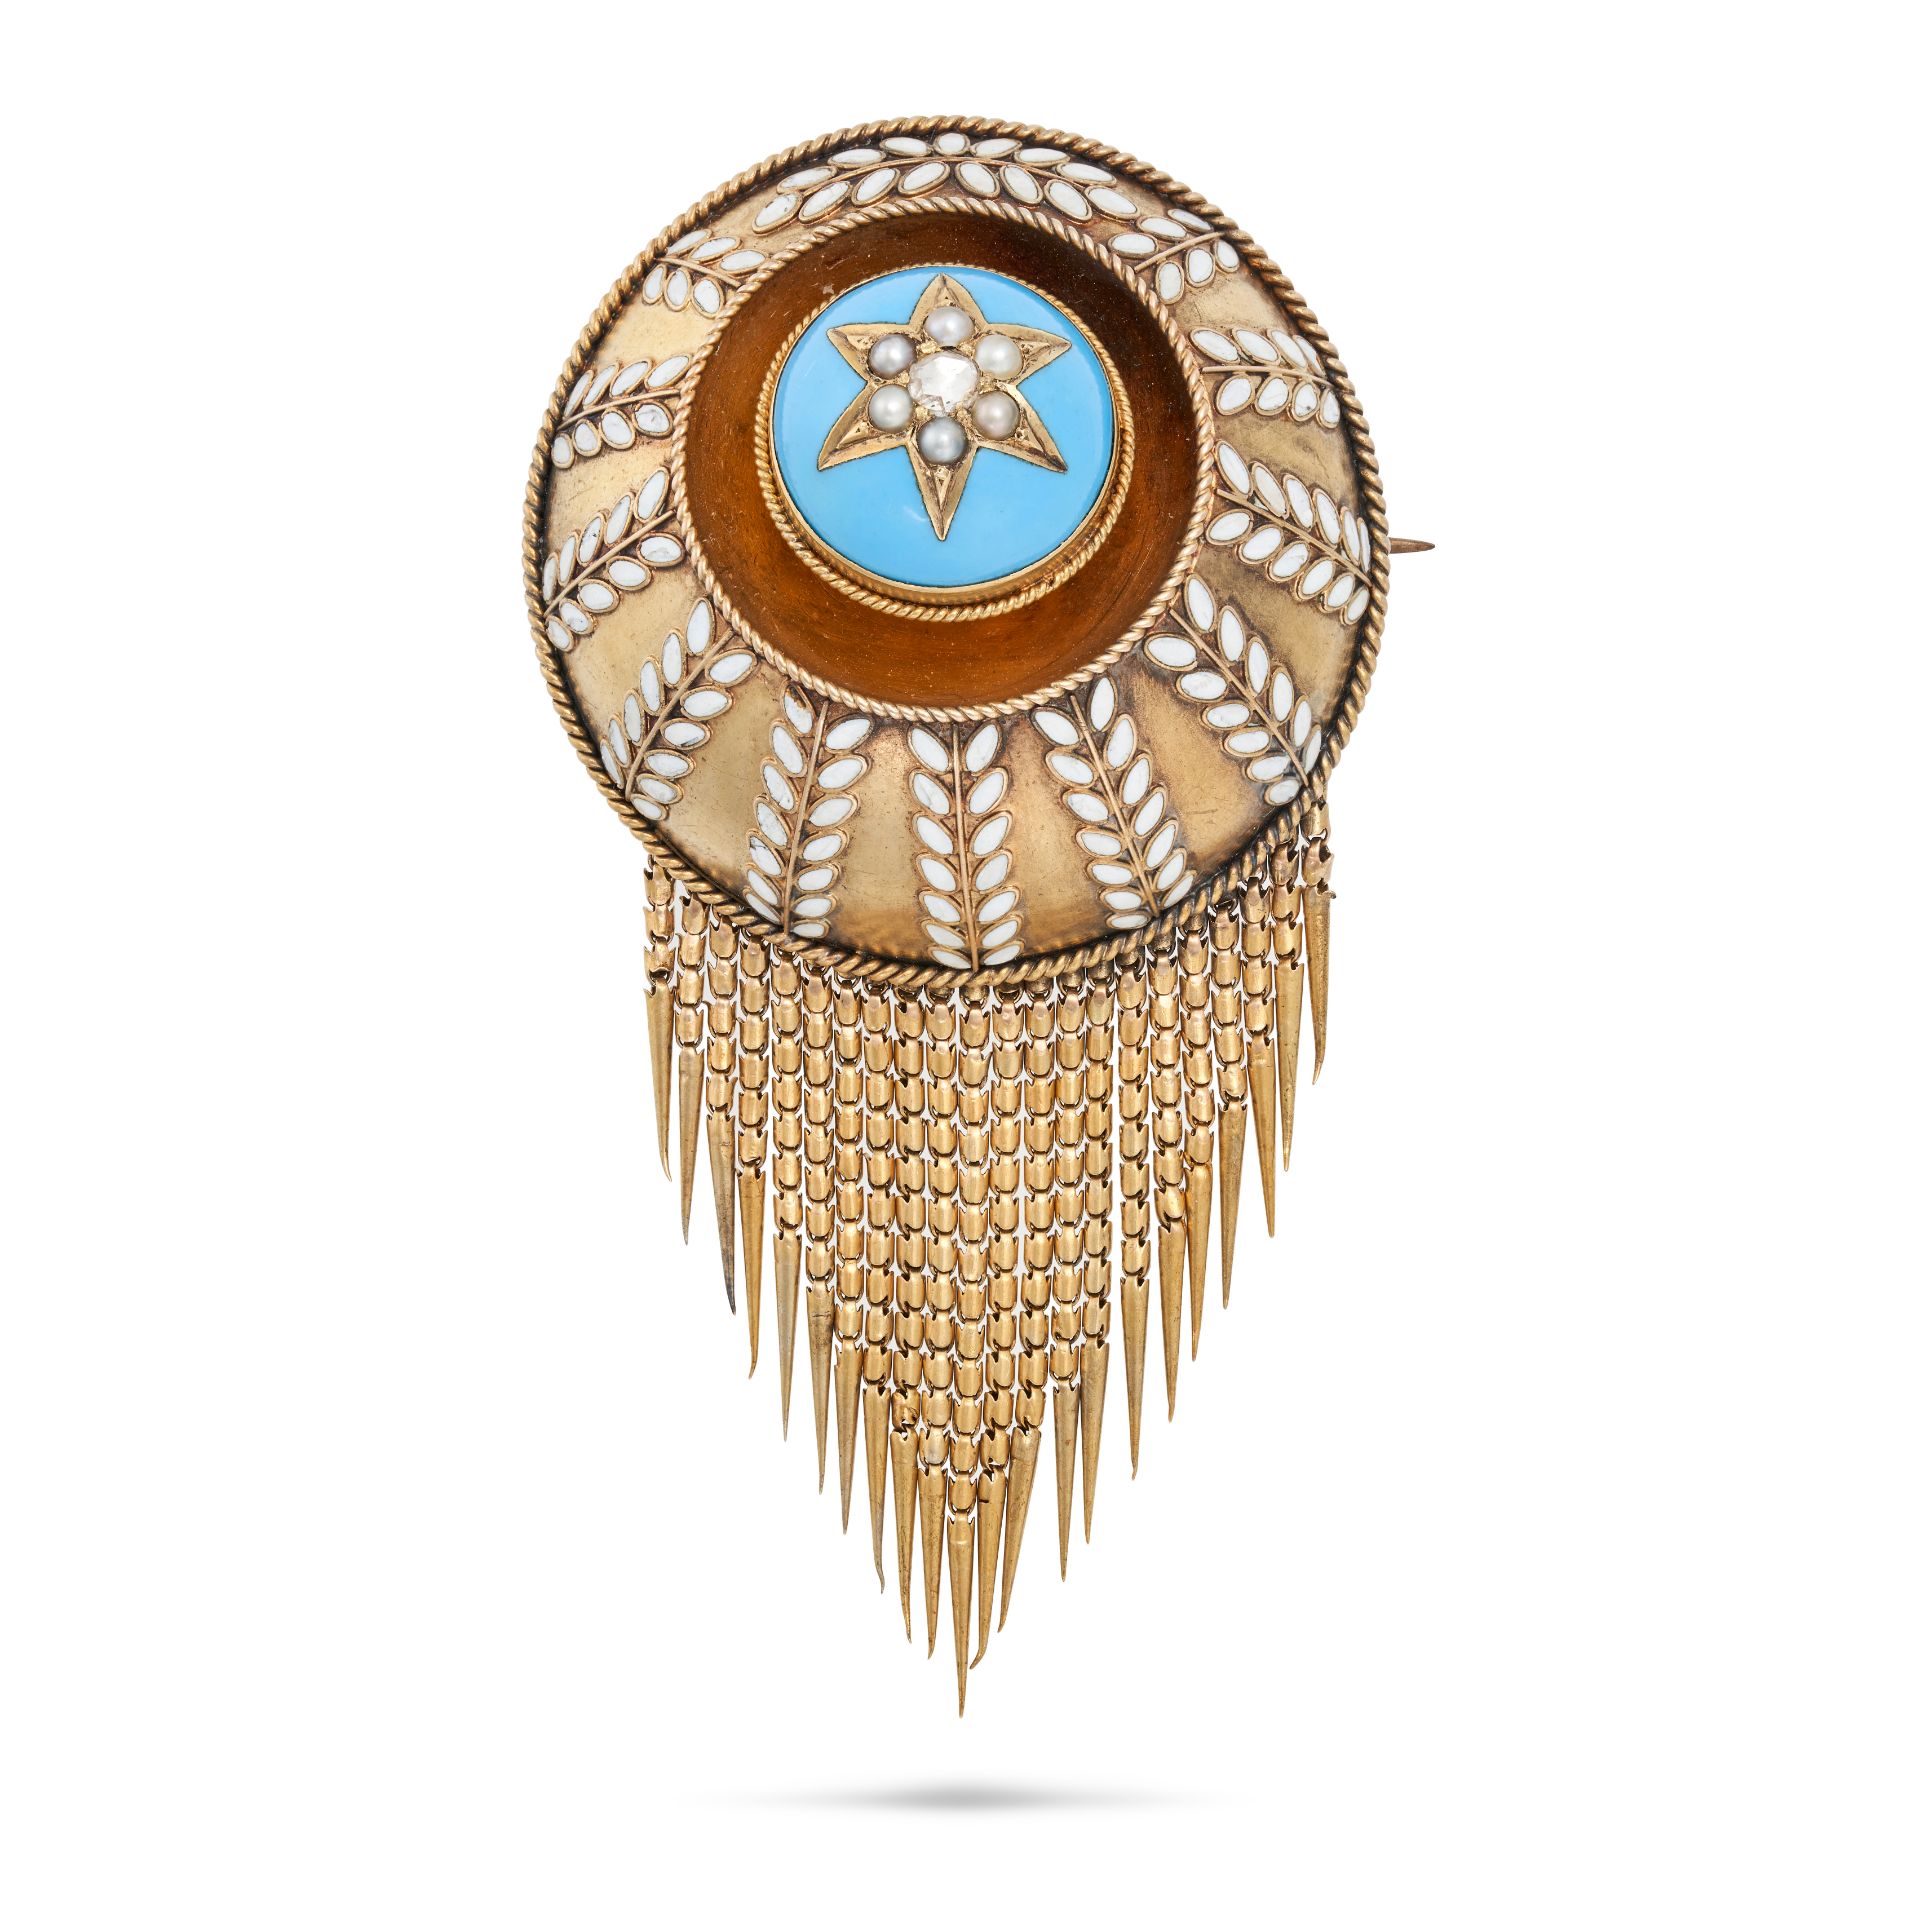 A FINE ANTIQUE ENAMEL AND PEARL TASSEL MOURNING BROOCH, 19TH CENTURY the circular domed face deco...